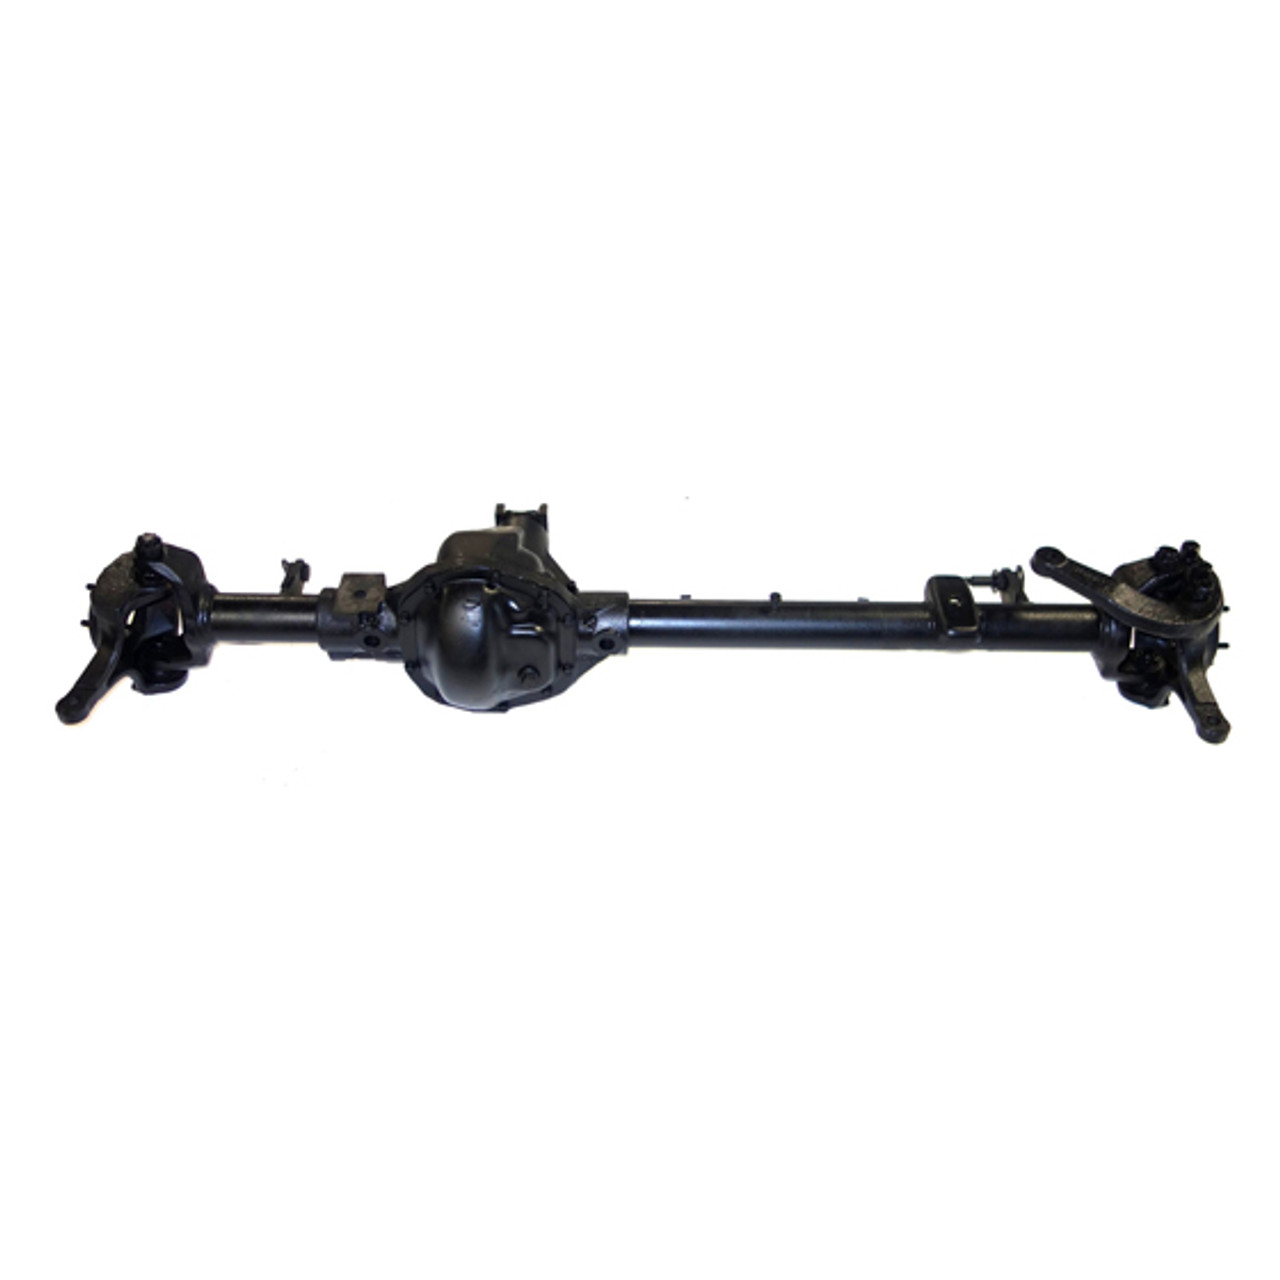 Reman Complete Axle Assembly for Dana 44 2001 Dodge Ram 1500 3.90 Ratio with 4 Wheel ABS